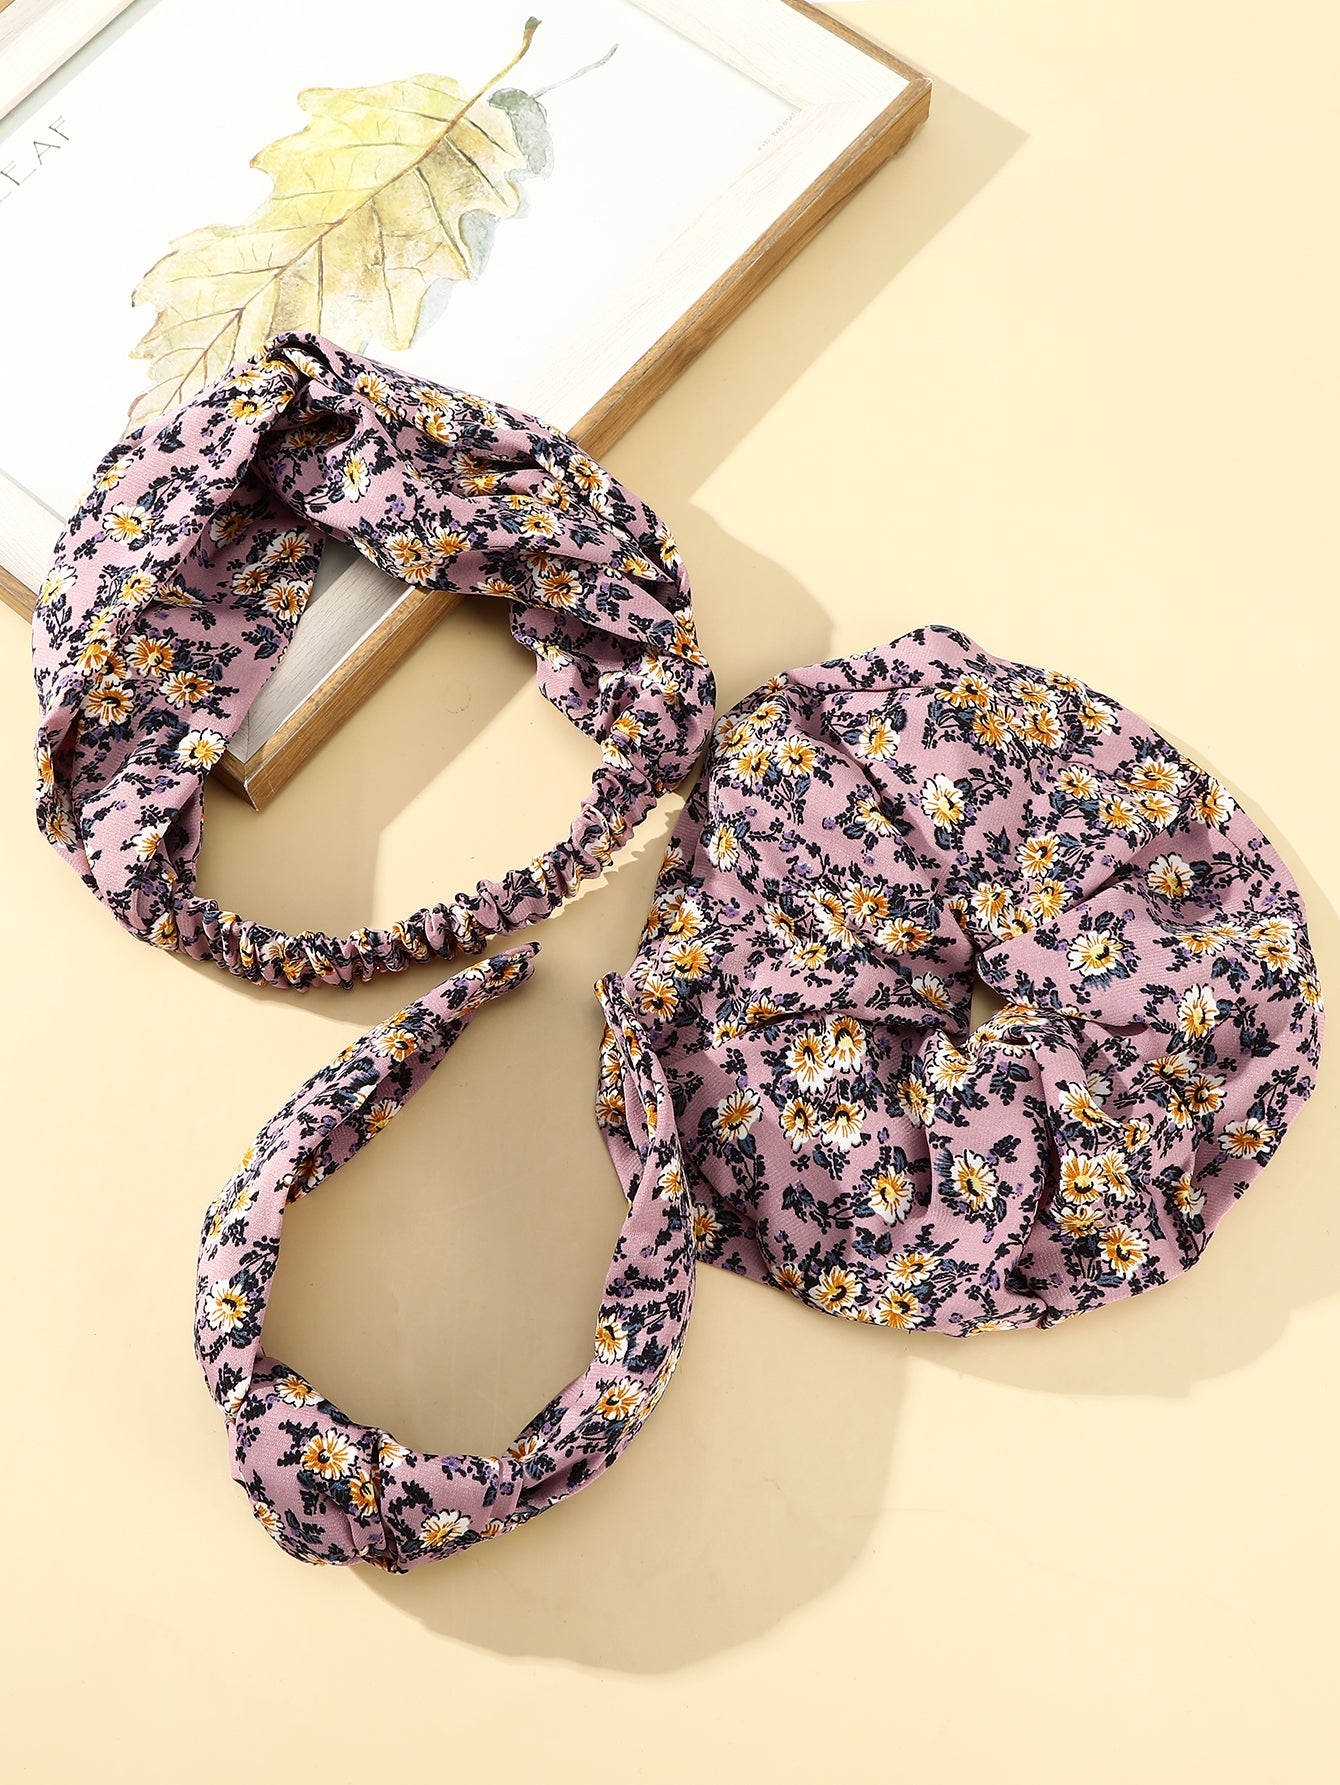 Small floral headband + hair band + 20cm large intestine hair ring 3 pieces - 1 set